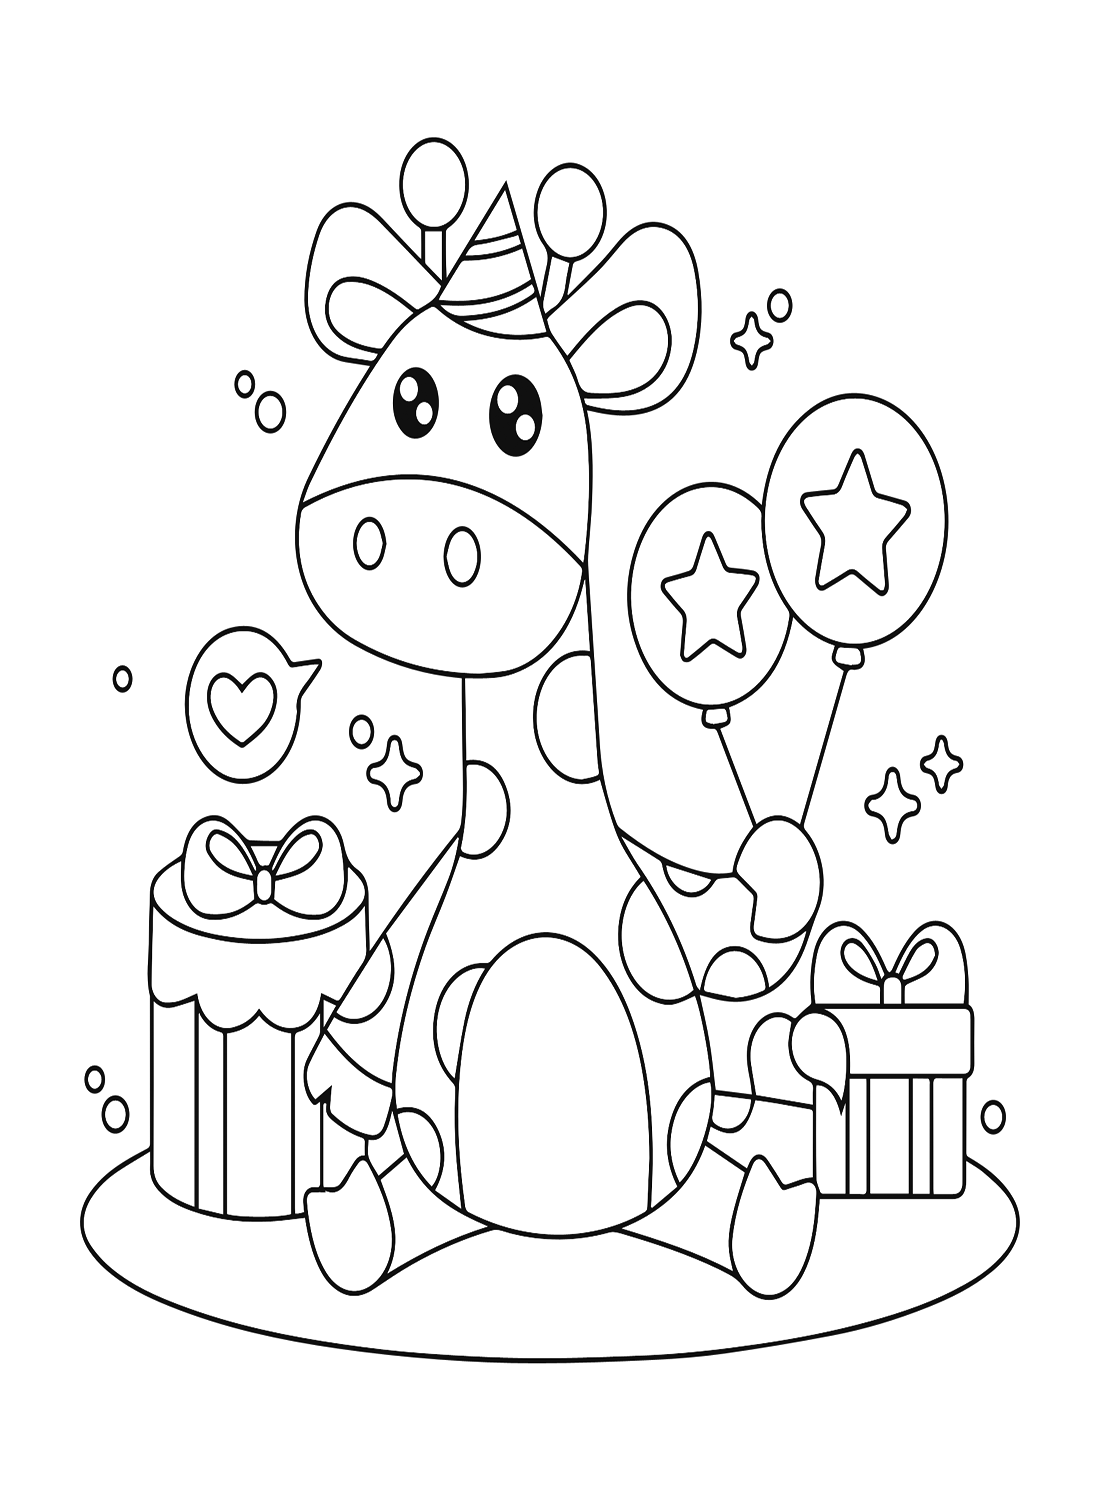 Kawaii Animal Pictures Coloring Page